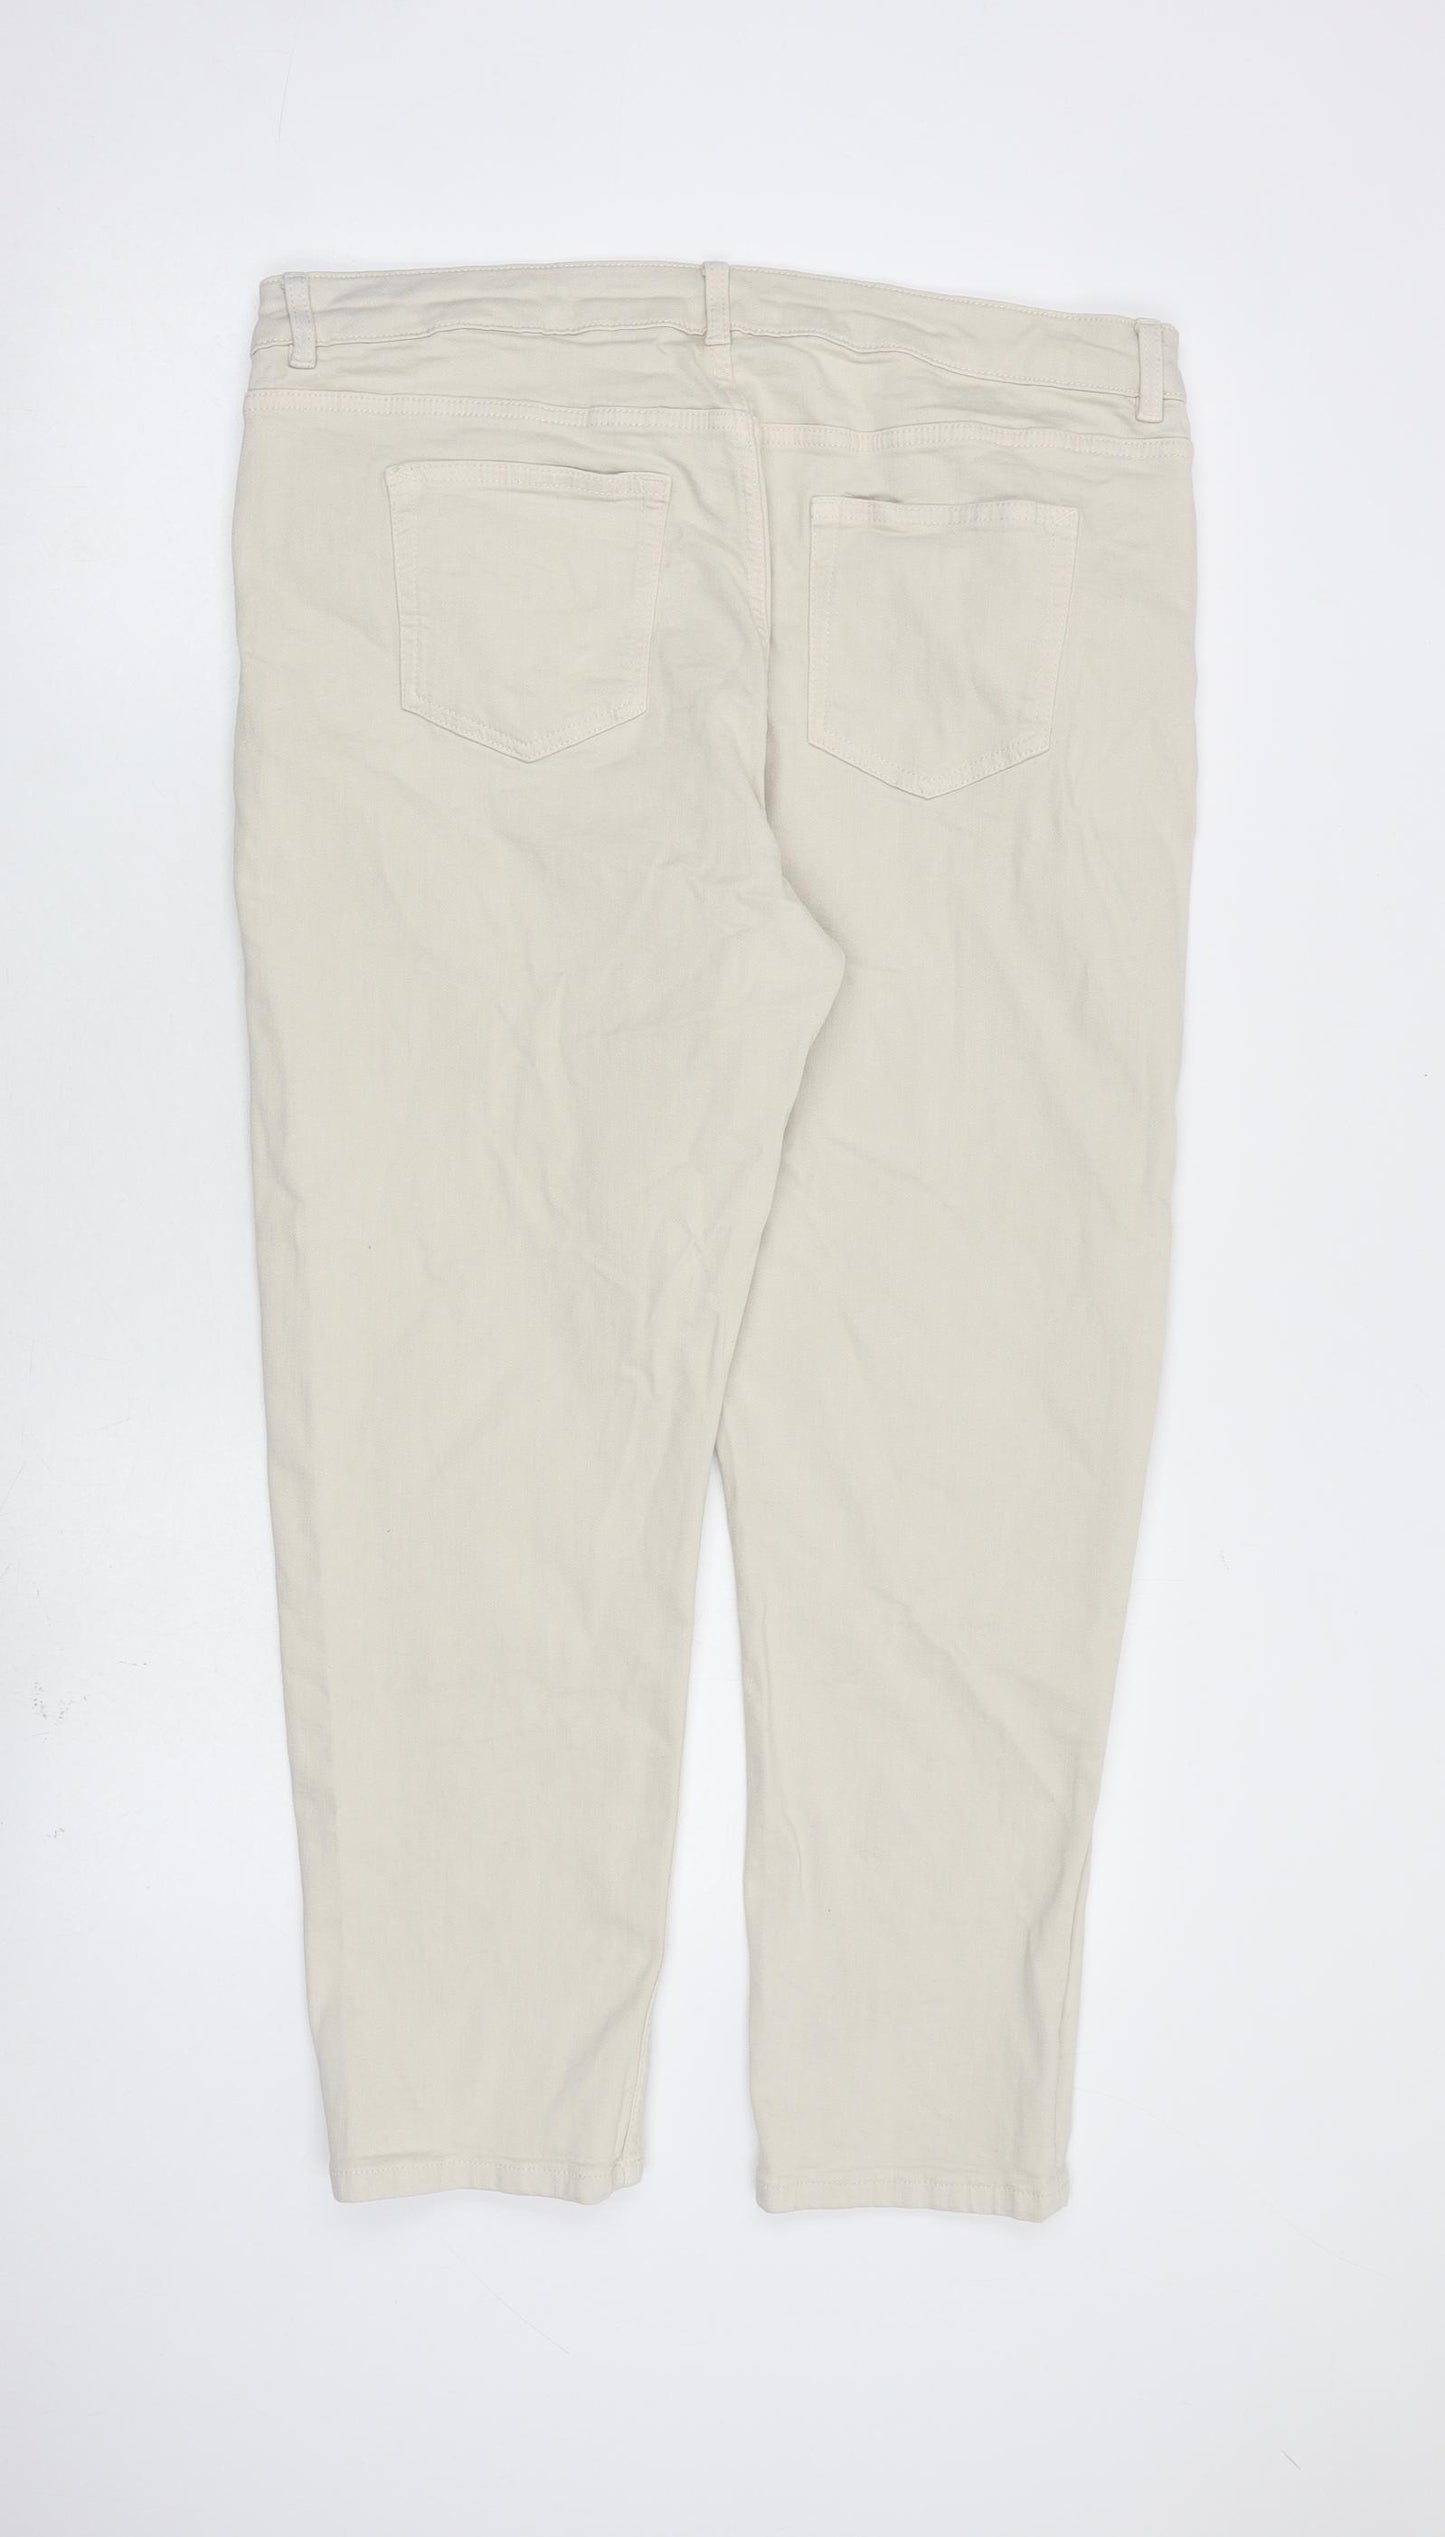 Marks and Spencer Womens Beige Cotton Skinny Jeans Size 16 L26 in Relaxed Zip - Slim